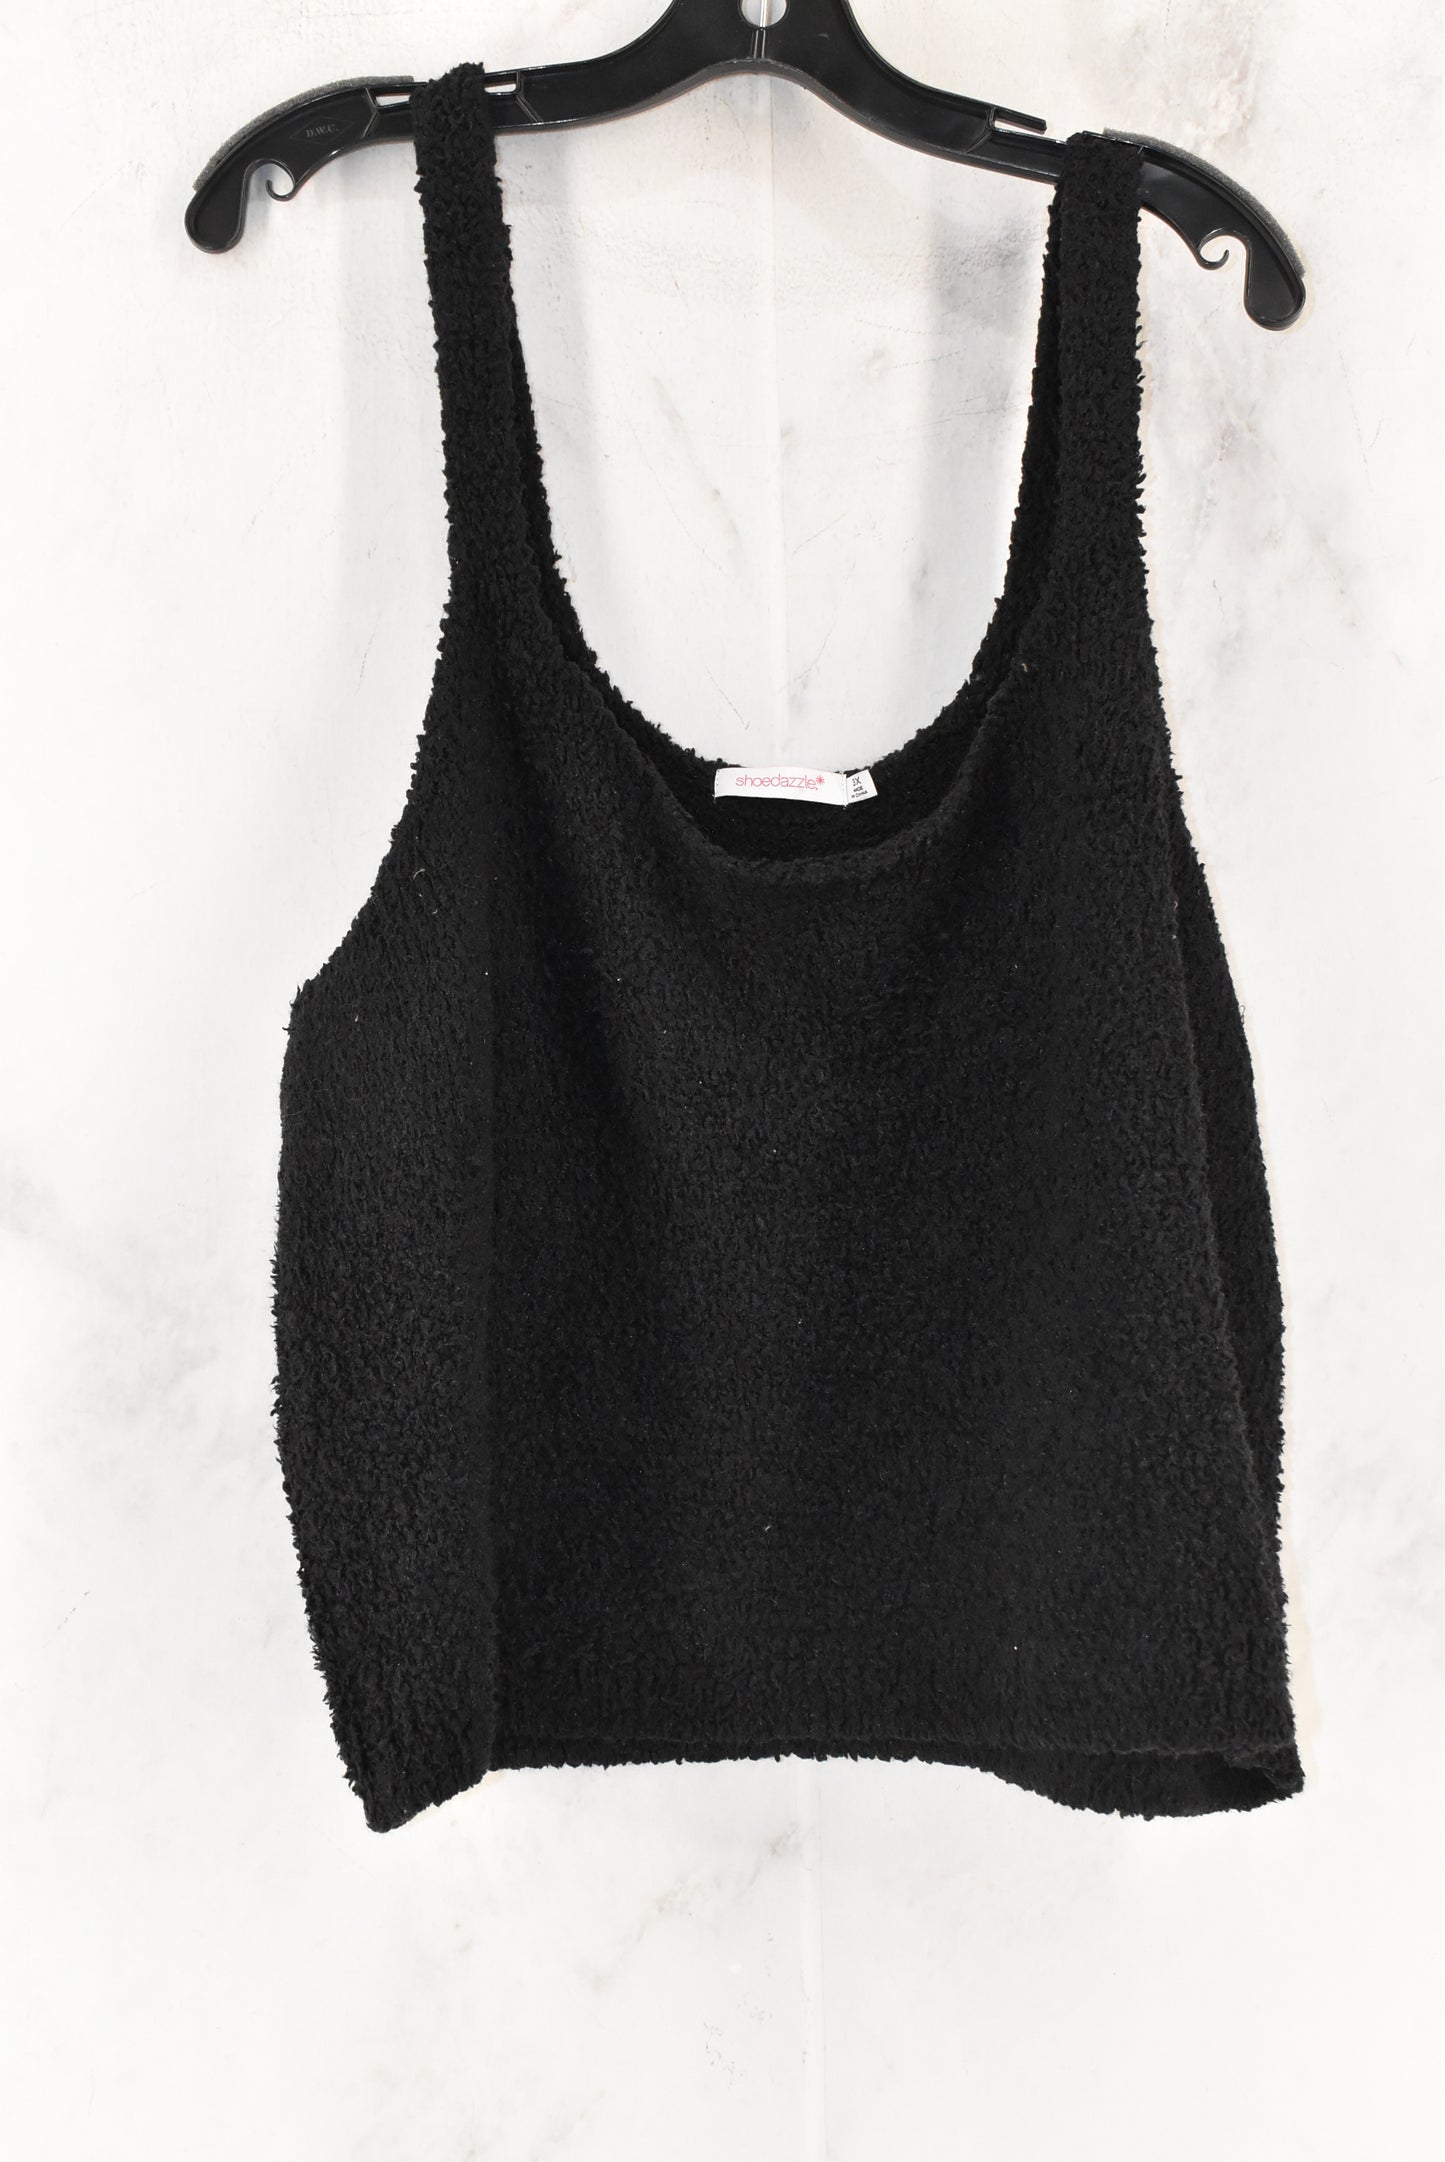 Top Sleeveless By Shoedazzle  Size: 2x